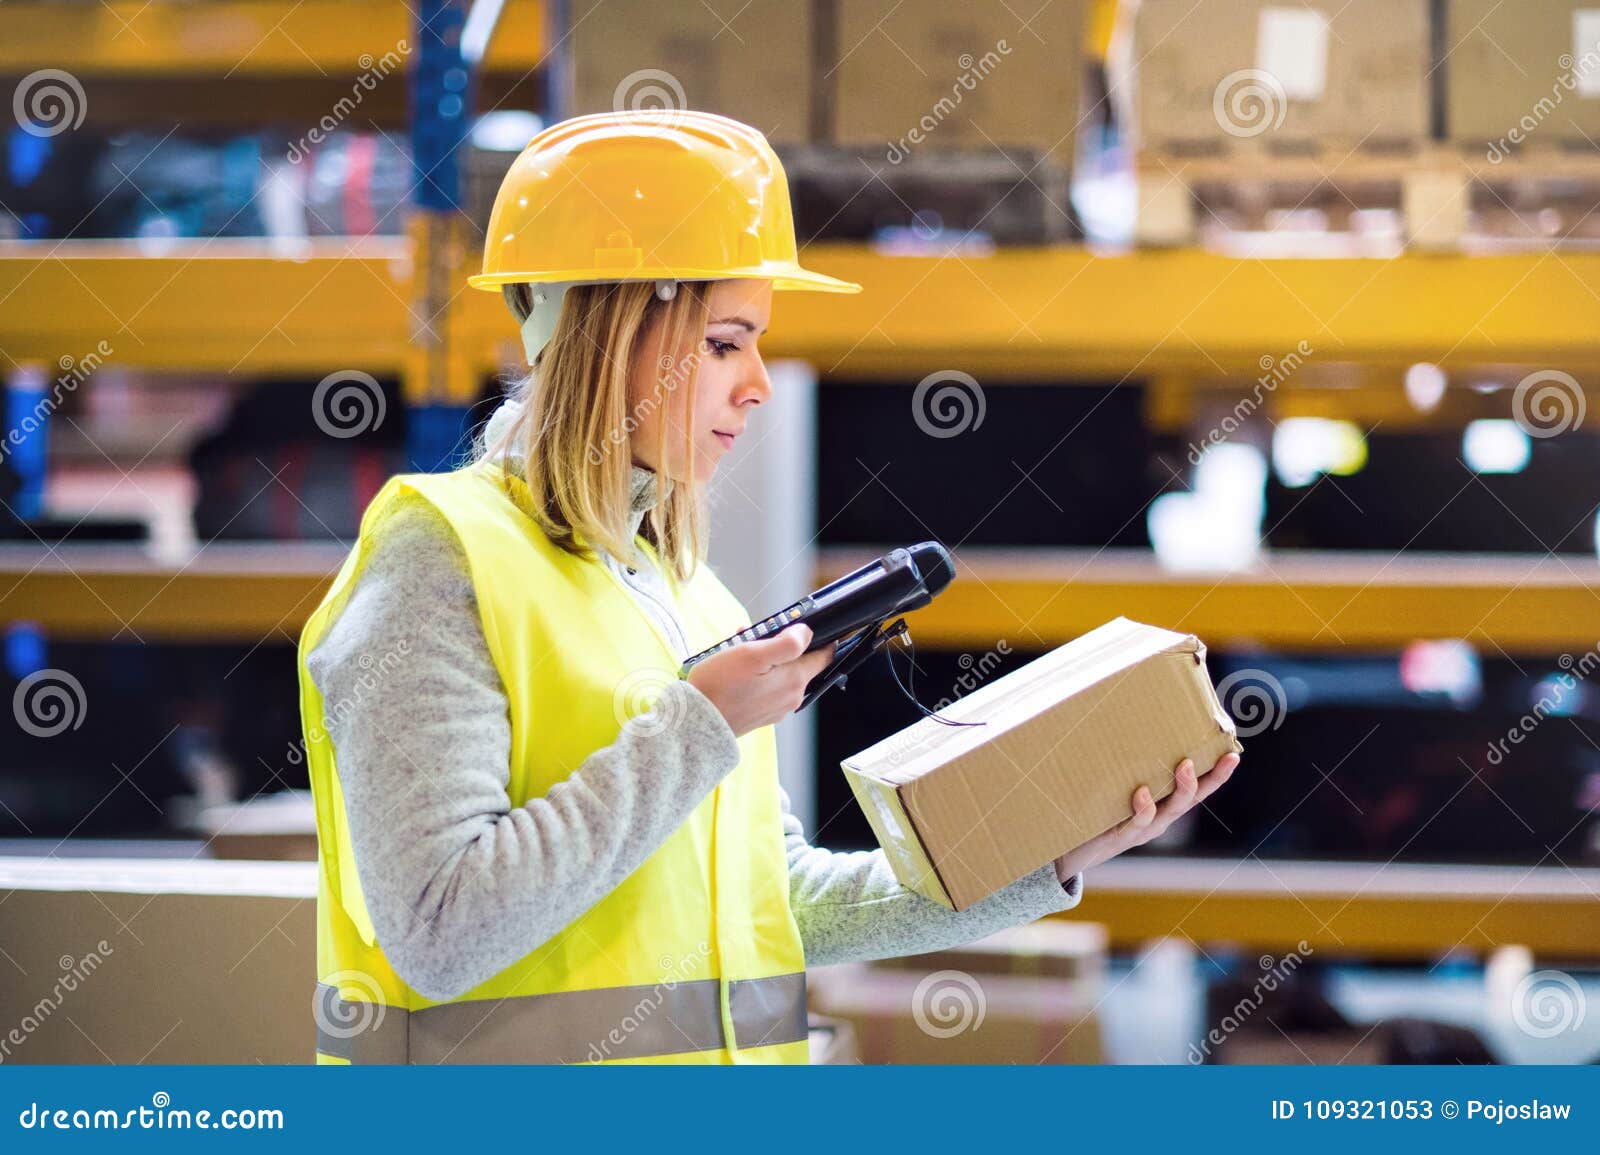 warehouse woman worker with barcode scanner.